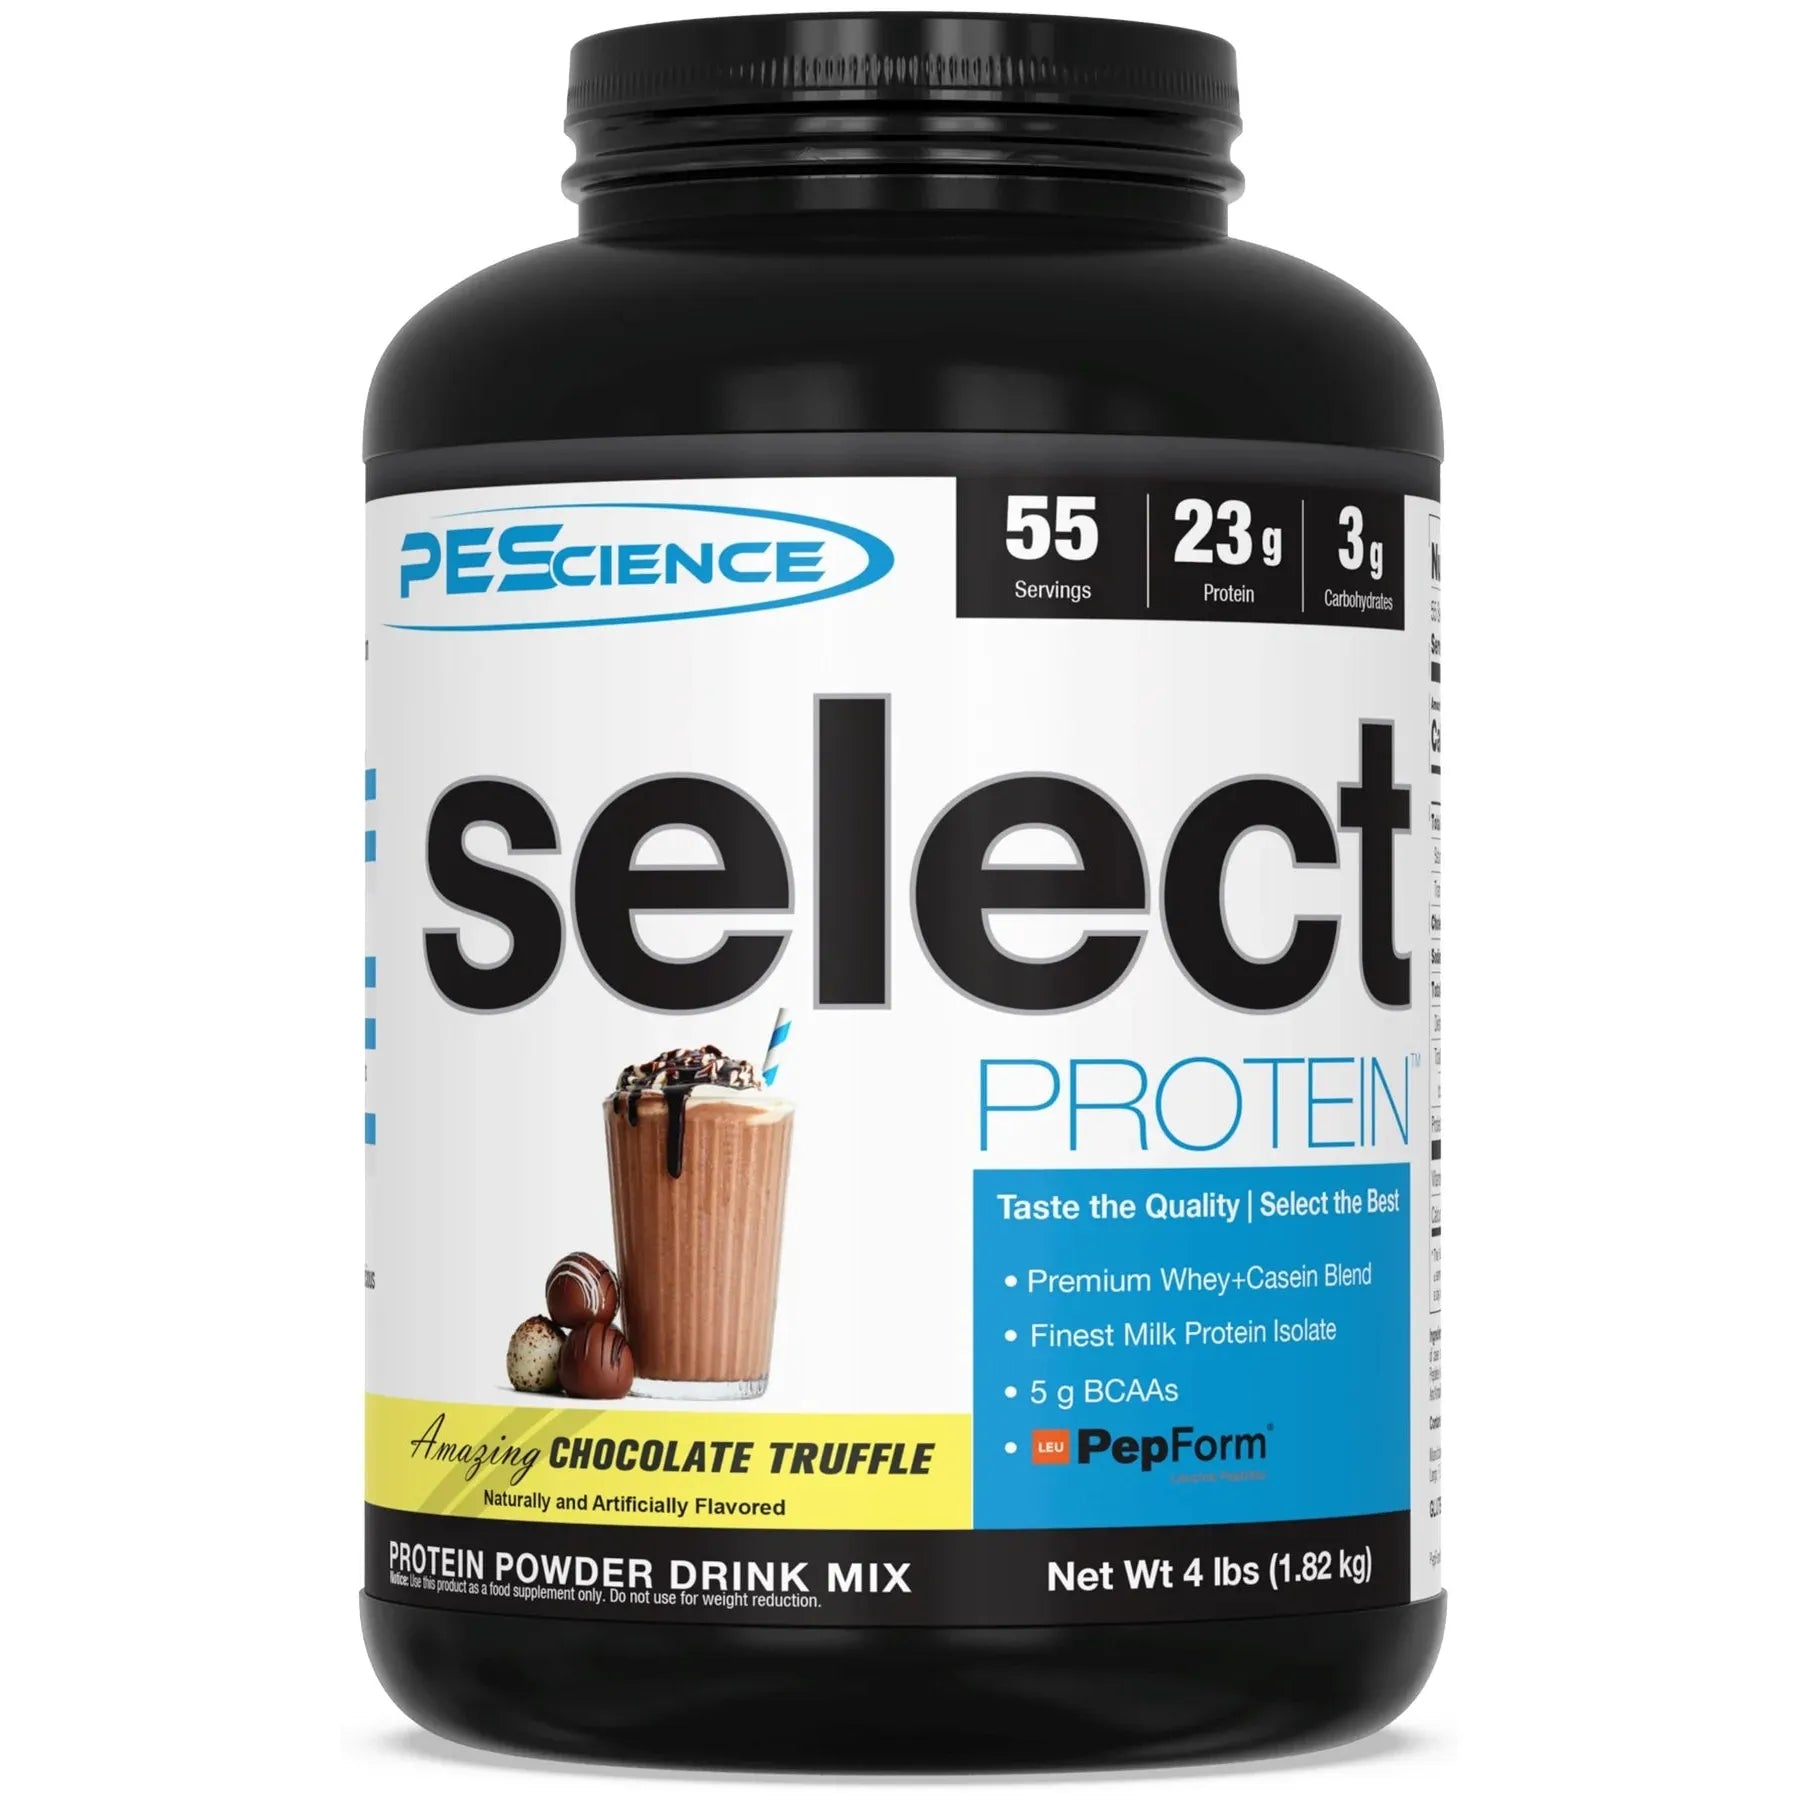 PEScience Select Protein (55 servings) pescience-select-protein-5lbs Whey Protein Blend Chocolate Truffle PEScience